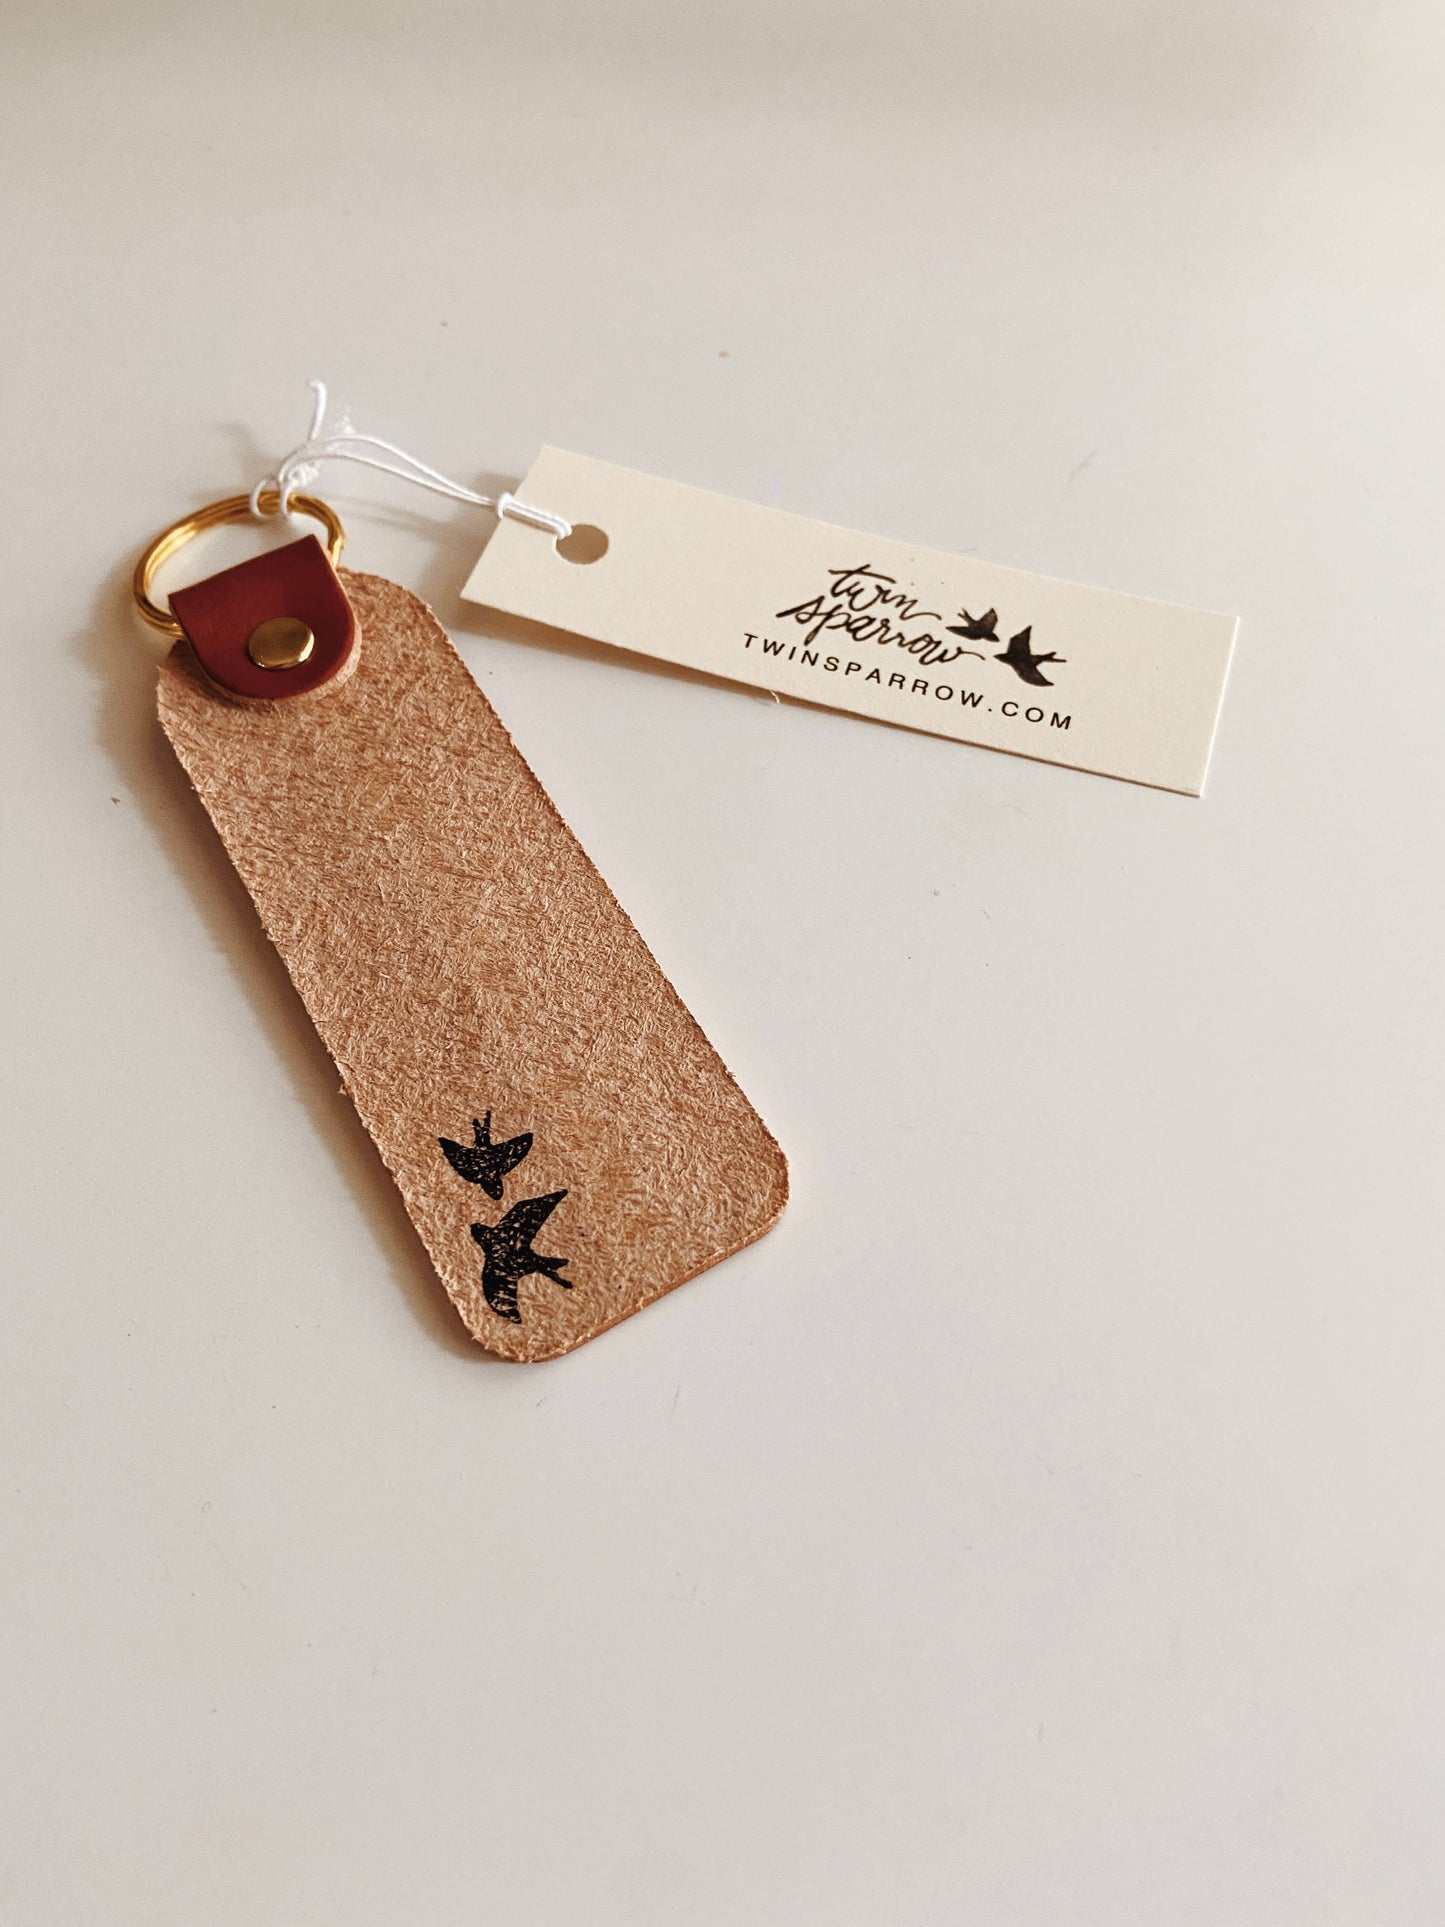 "Welcome Home" Keychain: Camel / Gold